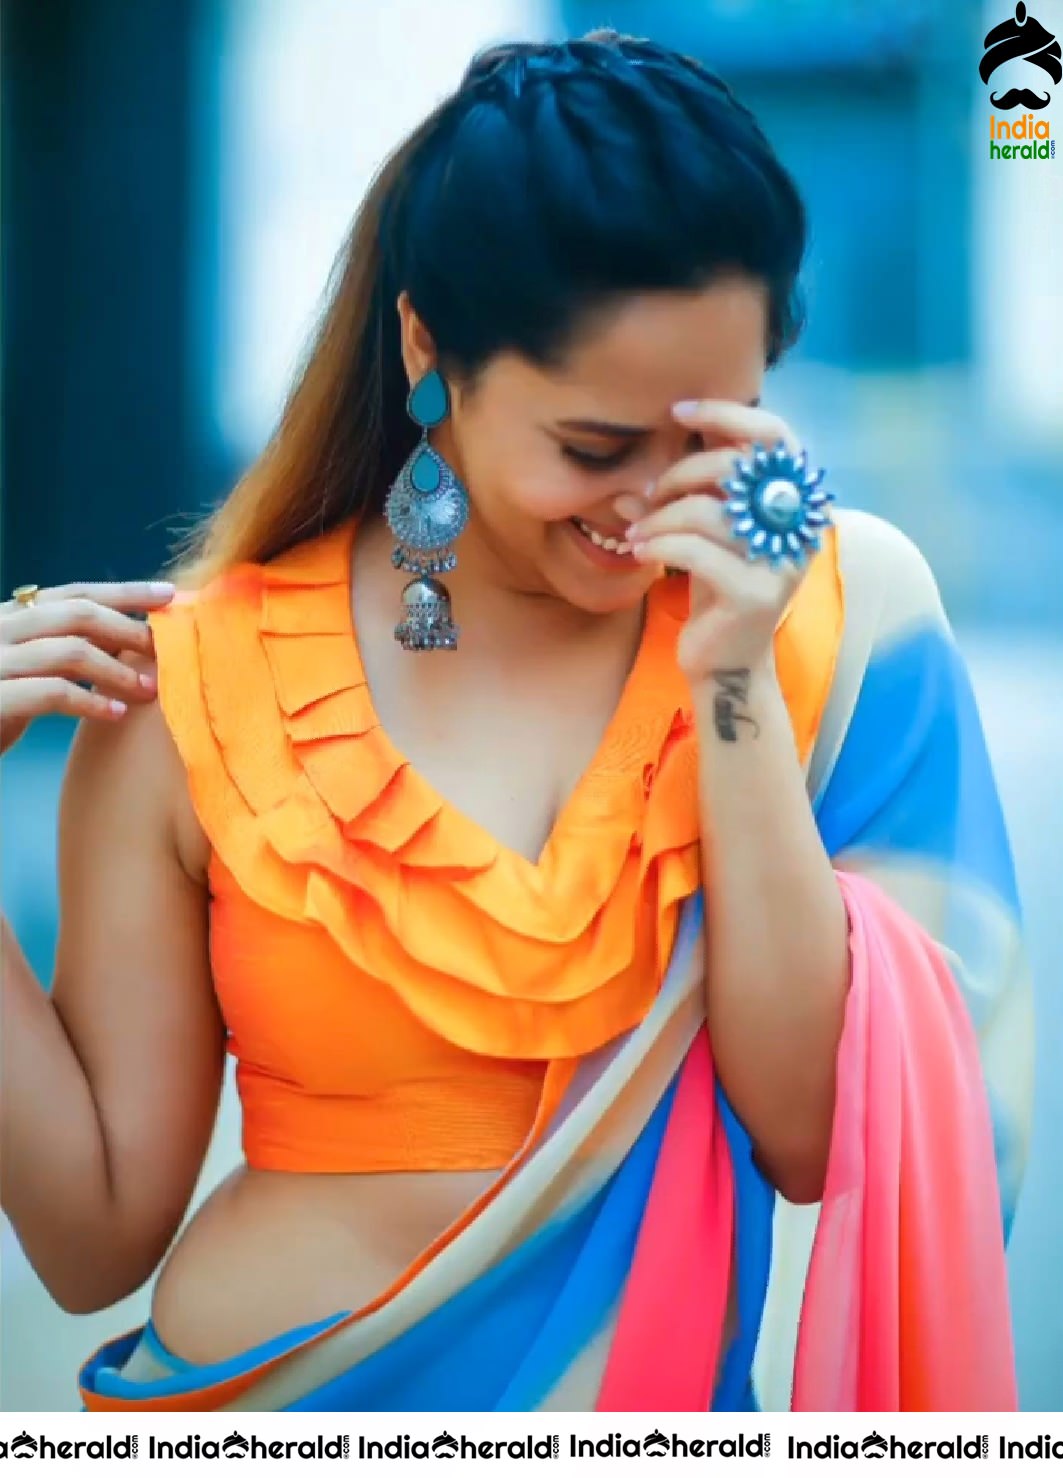 Sizzling Anasuya Shows her Hot Curves in Saree